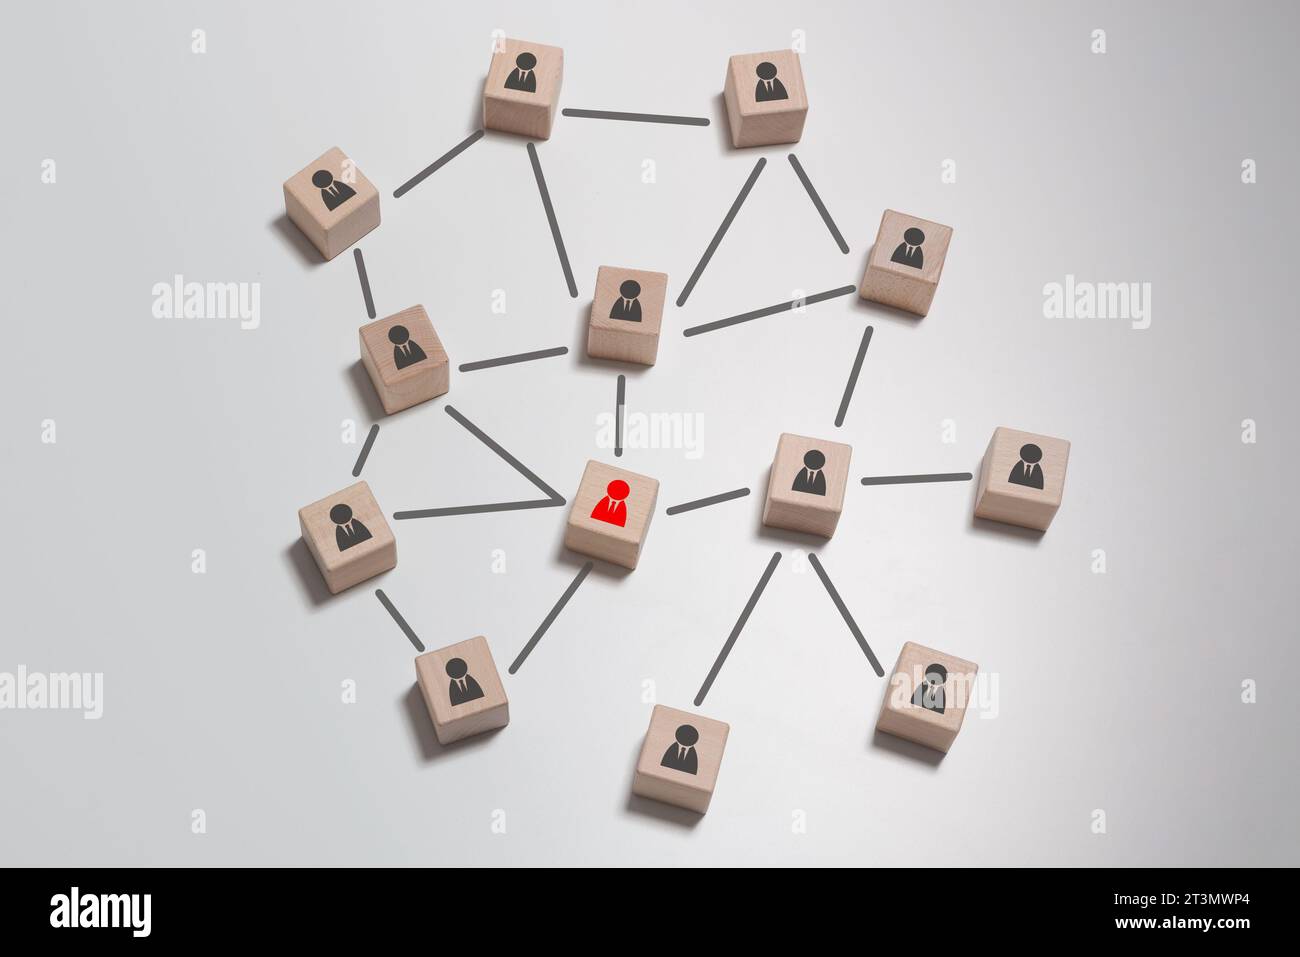 Teamwork and community concept with wooden blocks and icons Stock Photo